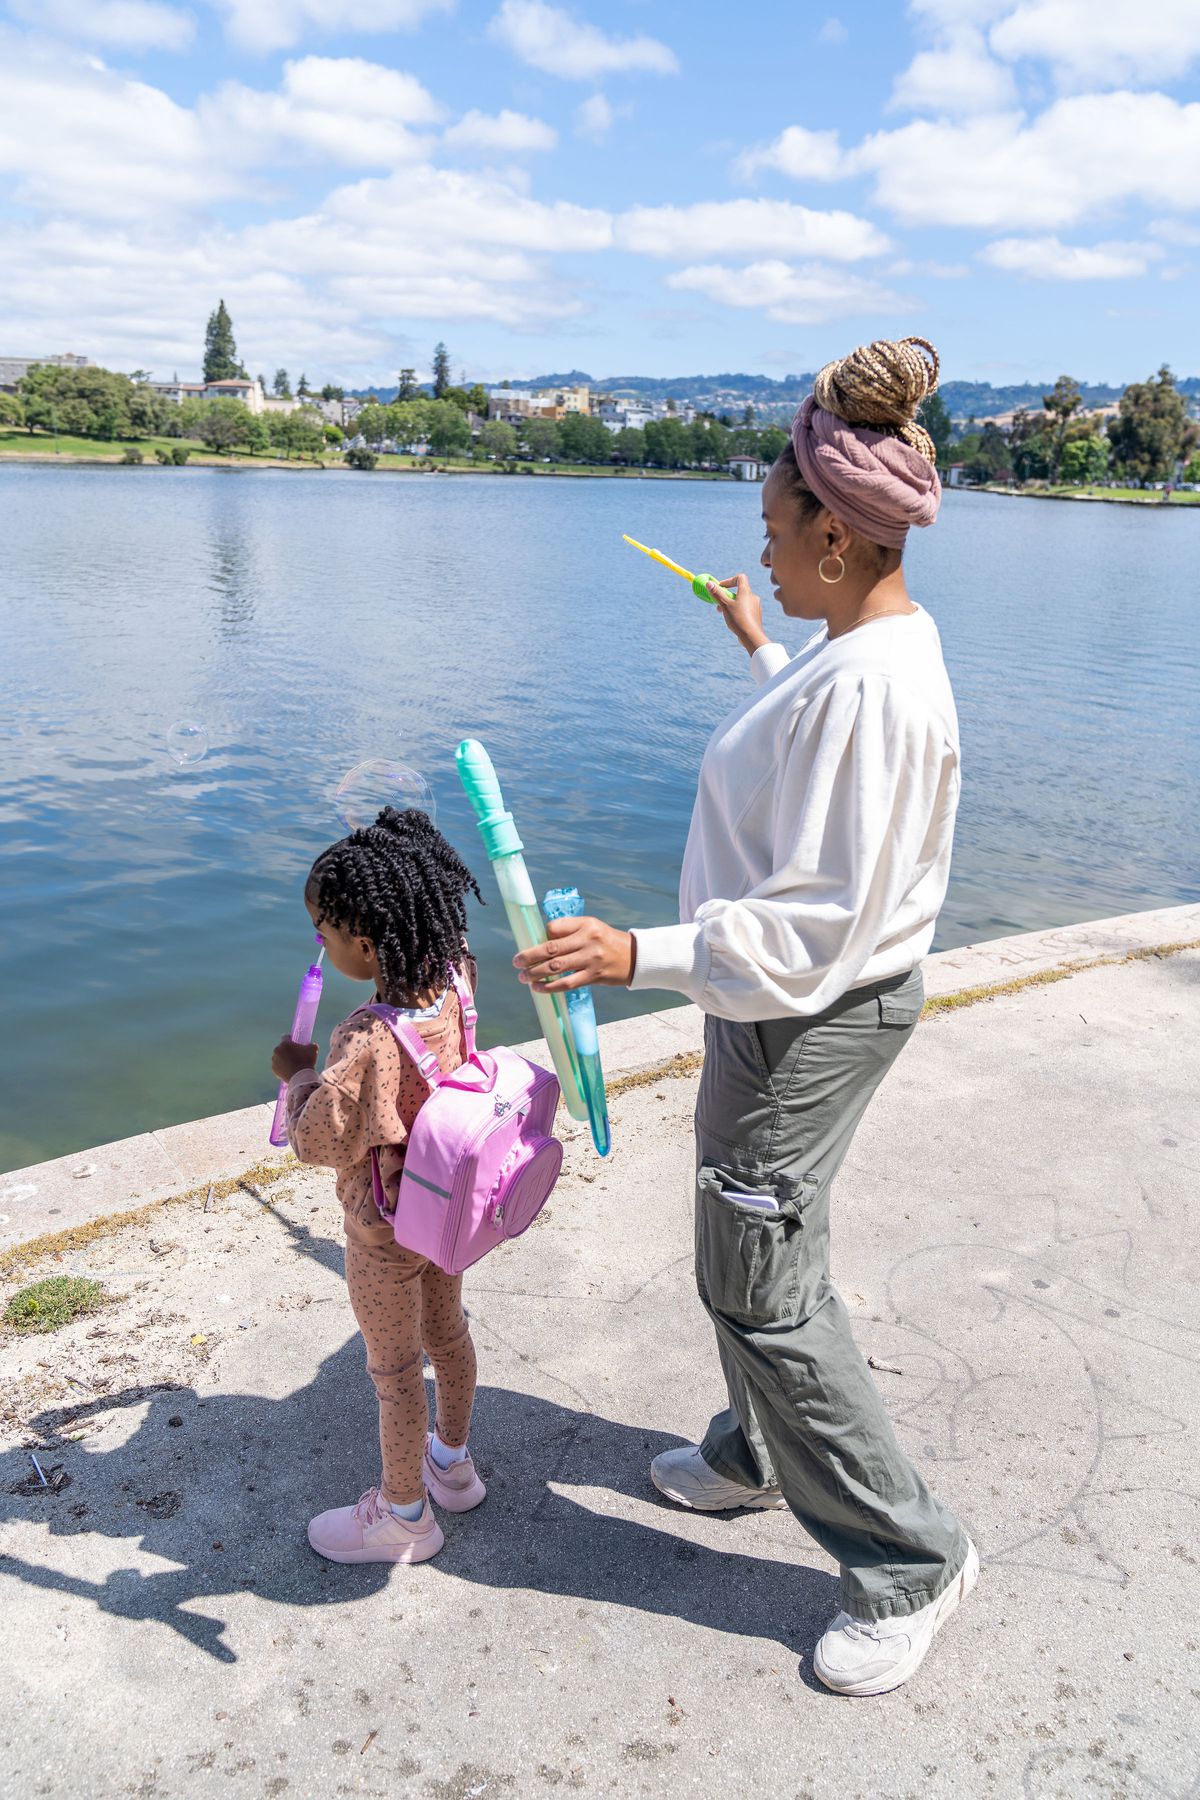 Stephanie McWoods blowing bubbles with her daughter at the edge of Lake Merritt in Oakland, California.